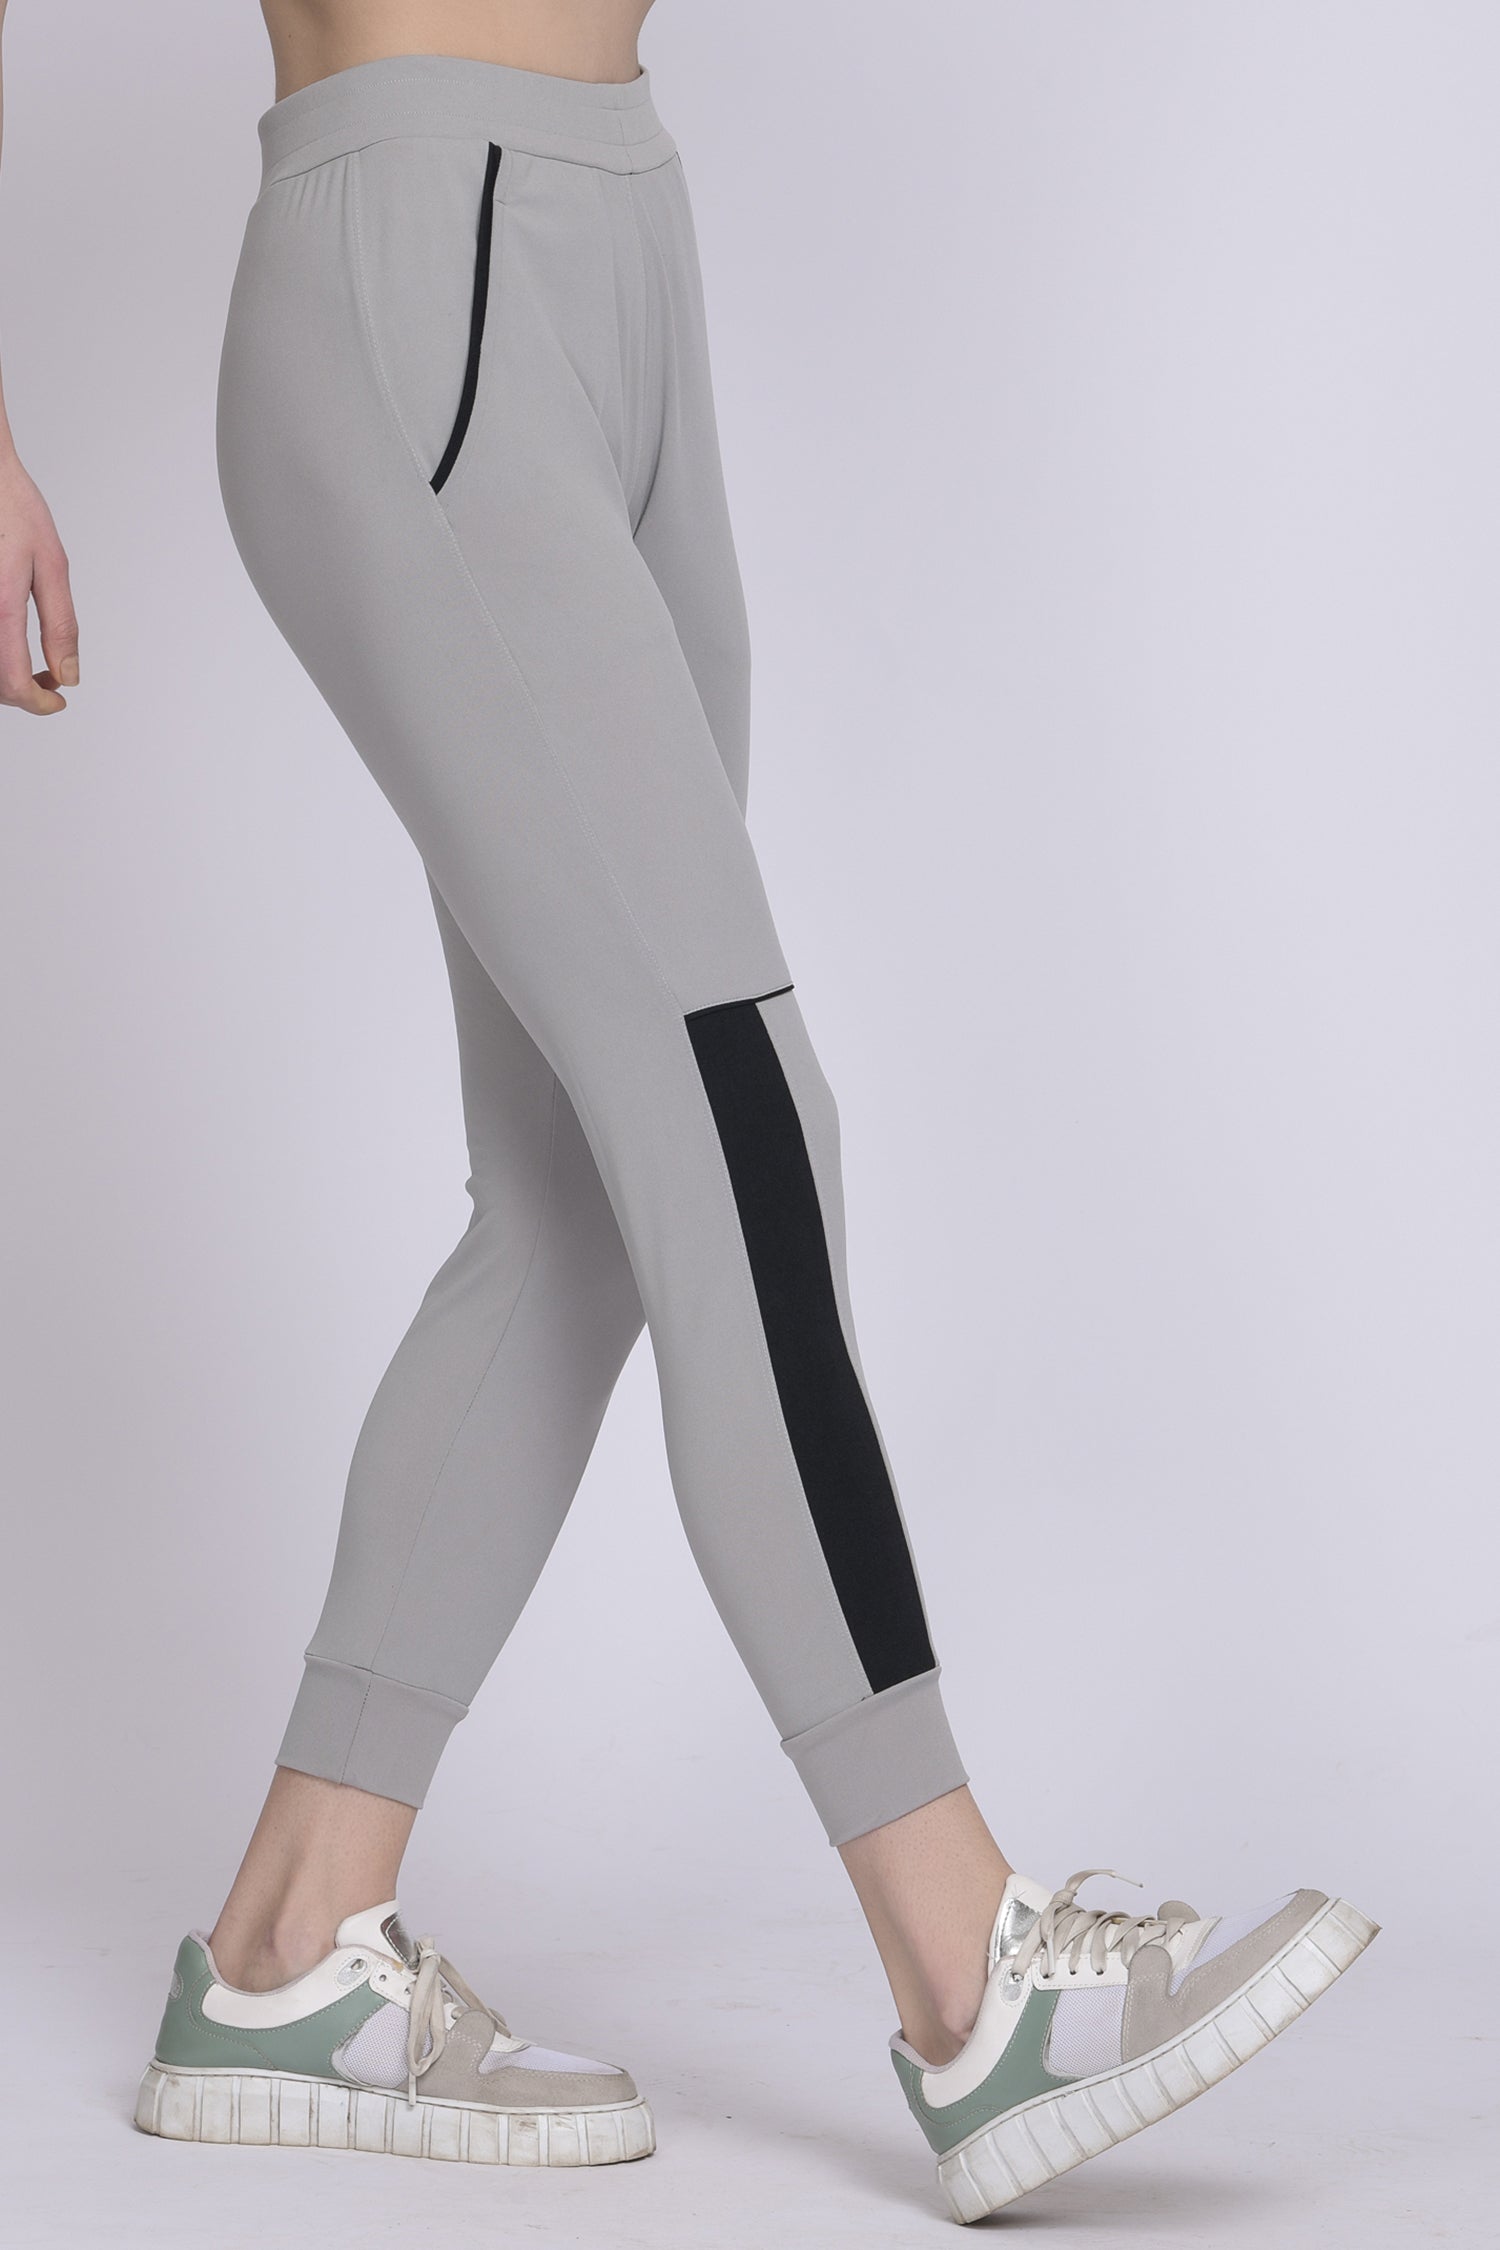 Jockey in Nepal - Slim Fit Track Pant for Men with Drawstring Closure *  Style number: SP27 * Price: Rs 3530 Accentuate your monochrome look by  wearing this track pants from Jockey.